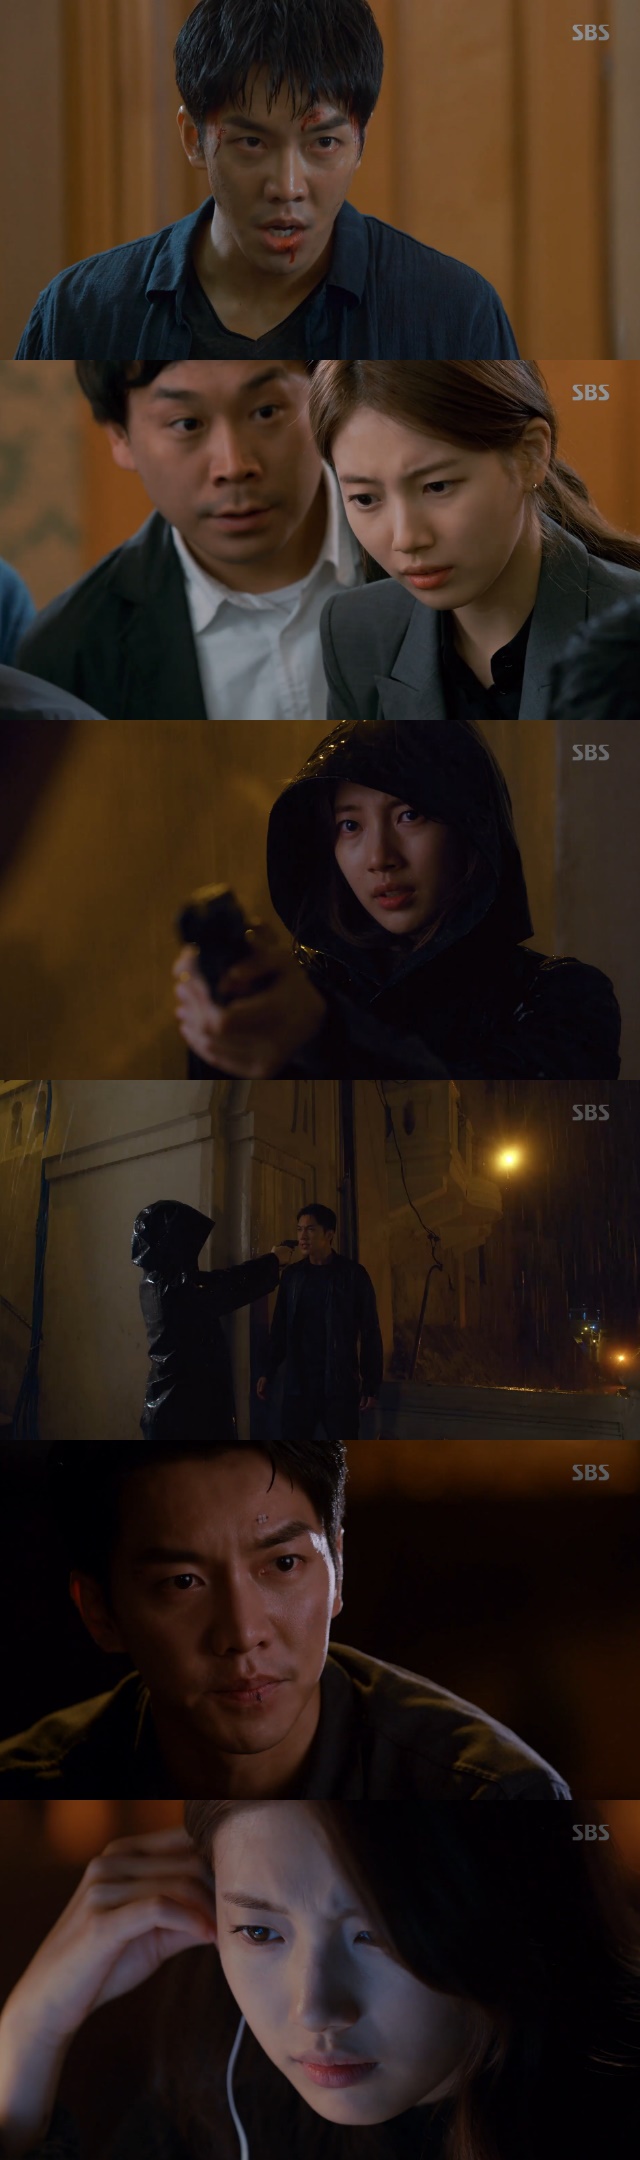 Bae Suzy captures the circumstances of Planes terrorIn the second episode of SBSs new gilt drama Vagabond (playplayplay by Jang Young-chul, Jung Kyung-soon/directed Yoo In-sik), which was broadcast on September 21, the figure of Bae Suzy, who traces the cause of Planes accident, was drawn according to Cha Dal-guns claim.Cha Dal-gun, who had been fighting with Terrorbum Jerome (Yoo Tae-oh), appeared in front of his bereaved family, bloody after missing Terrorbum in front of him.Chadalgan showed the last video his nephew Hun left behind, claiming Planes was terrored, not a crash.When the bereaved families were confused, Chadalgan said he saw the terrobum at the airport with the confession, but the confession said he did not remember the video.Eventually, Cha Dal-geon asked for CCTV confirmation at the airport, but another person appeared in the video.The bereaved families were angry that they had deceived them, treating Chadalgan as a strange person, but Chadalgan did not bow, shouting that CCTV was manipulated.So, he found the accommodation of Gohari with the video left by his nephew on USB, but Gohari pointed the gun at him.Chadalgan shouted, What are you, who are you? and thought that Gohari was on the same side as Terror.After fighting, Cha Dal-gun, who overpowered Goh Hae-ri, searched the accommodation of Goh Hae-ri and found out that he was a black agent of the NIS.Youre responsible, too, Chadalgan told the confessional, who asked why he had come.Here is your good name. He asked him to help him after giving a notice to the Taekwondo demonstration team with the name of Gohari.After Cha Dal-geon returned, the confession tried to ignore it, but felt remorse.Eventually, he called Republican (Hwang Bo-ra) and asked him to check the phone records of a man suspected of being a terror in the video.He also asked Kang Ju-cheol (Lee Ki-young) to contact him to check the Planes black box.After the memorial service on the beach at Morocco, the bereaved families gathered at the airport to return to Korea, but Cha Dal-geon remained alone at Morocco to catch the terrobum.Cha Dal-gun, who tried to release the video online, was embarrassed to see that all the images were deleted in the cloud where his nephew posted the video.Chadalgan overpowered a suspected hotel employee after a fight, but was arrested by local police.Chadalgan stopped the runaway for a while because of a confession that he visited the police station as an embassy employee, but when he was taken to the police, he asked him to remove himself from the detention center, saying, If I am true, then you will be accompliced with the terror.Gohari, who could not ignore Cha Dal-guns words, visited the International Aviation Civil Organization with the help of Kang Ju-cheol and confirmed the voice recorder and aircraft computer data record containing the dialogue of the control room.In the voice of the control room, the bookkeeper had a conversation with a person who was supposed to be a lover in Spanish.Lee Ha-na